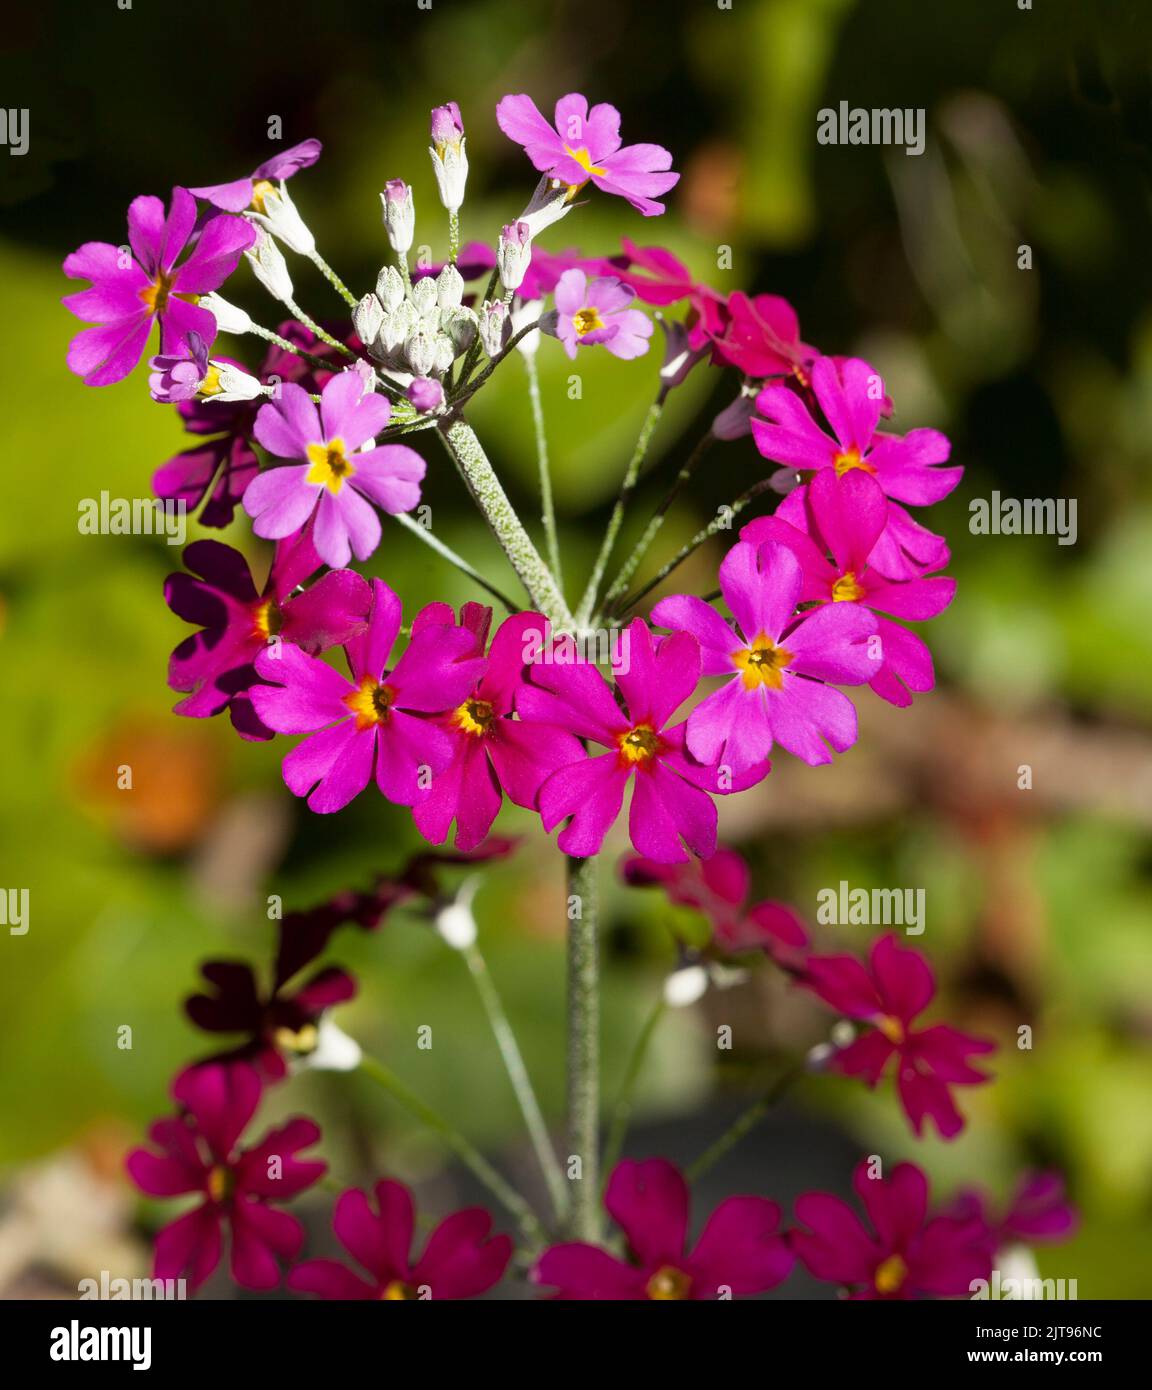 Cluster of vivid magenta red perfumed flowers of annual Primula malacoides against background of green foliage in Australia Stock Photo